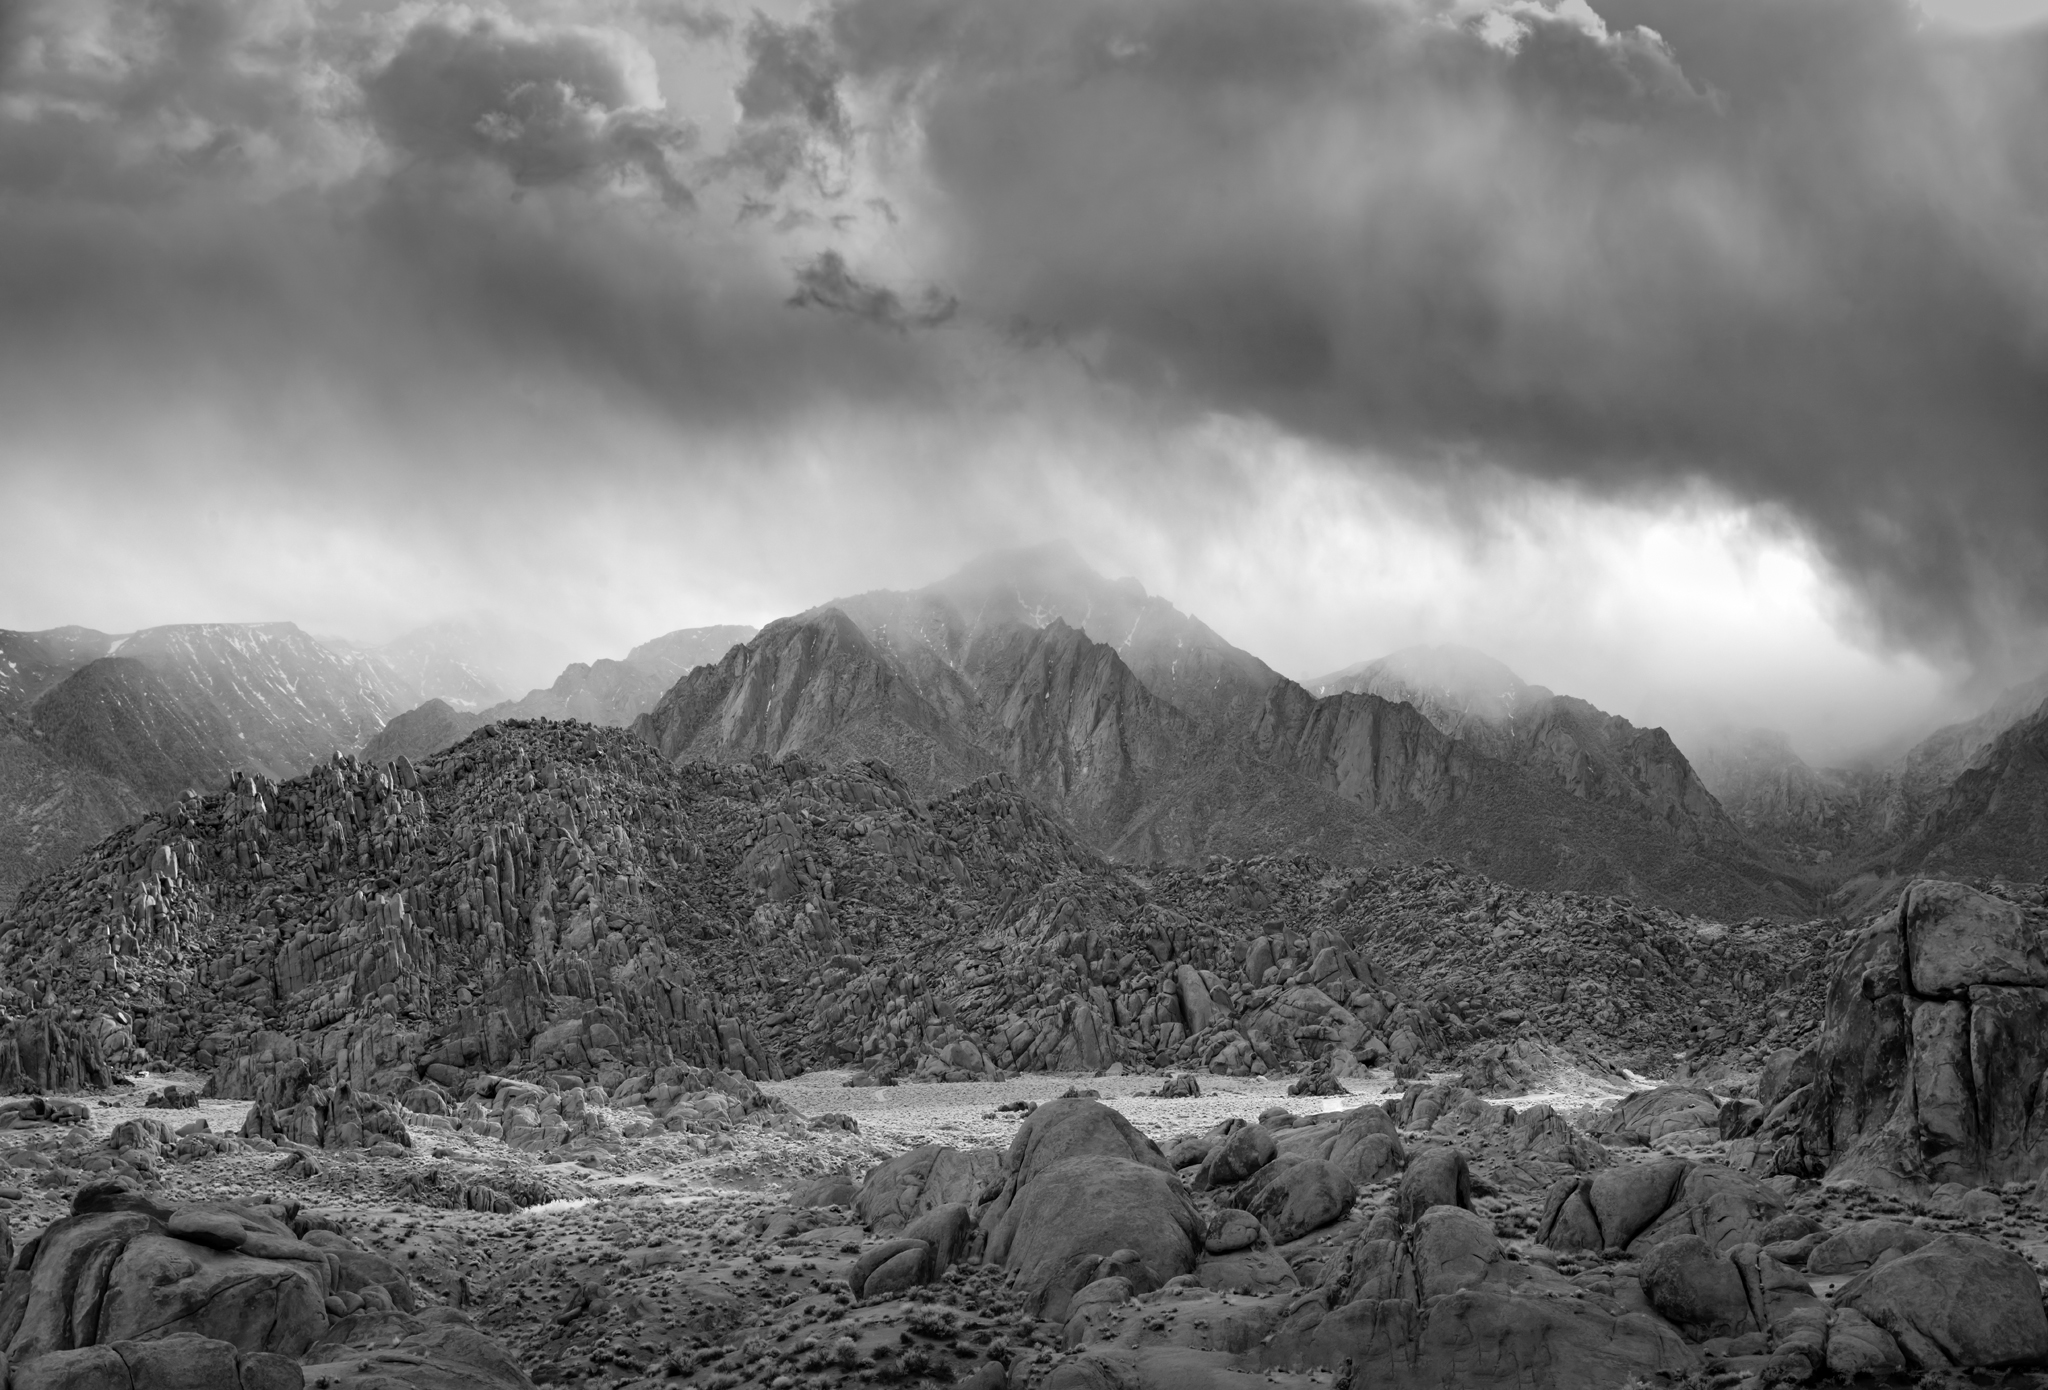 Mitch Dobrowner, Storm over Sierra Nevada, Catherine Couturier Gallery